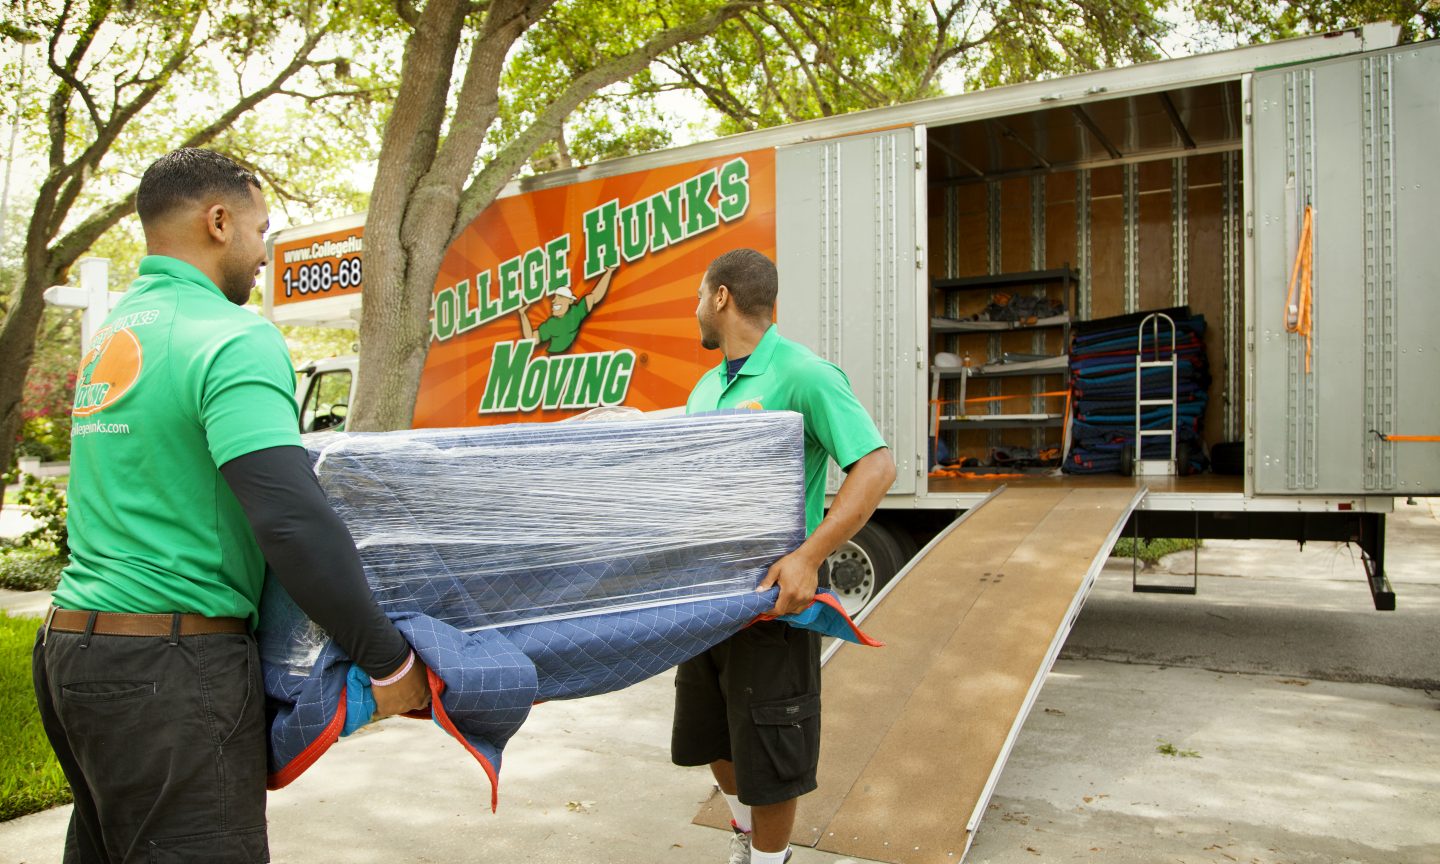 College Hunks Hauling Junk And Moving 5 Things To Know Nerdwallet